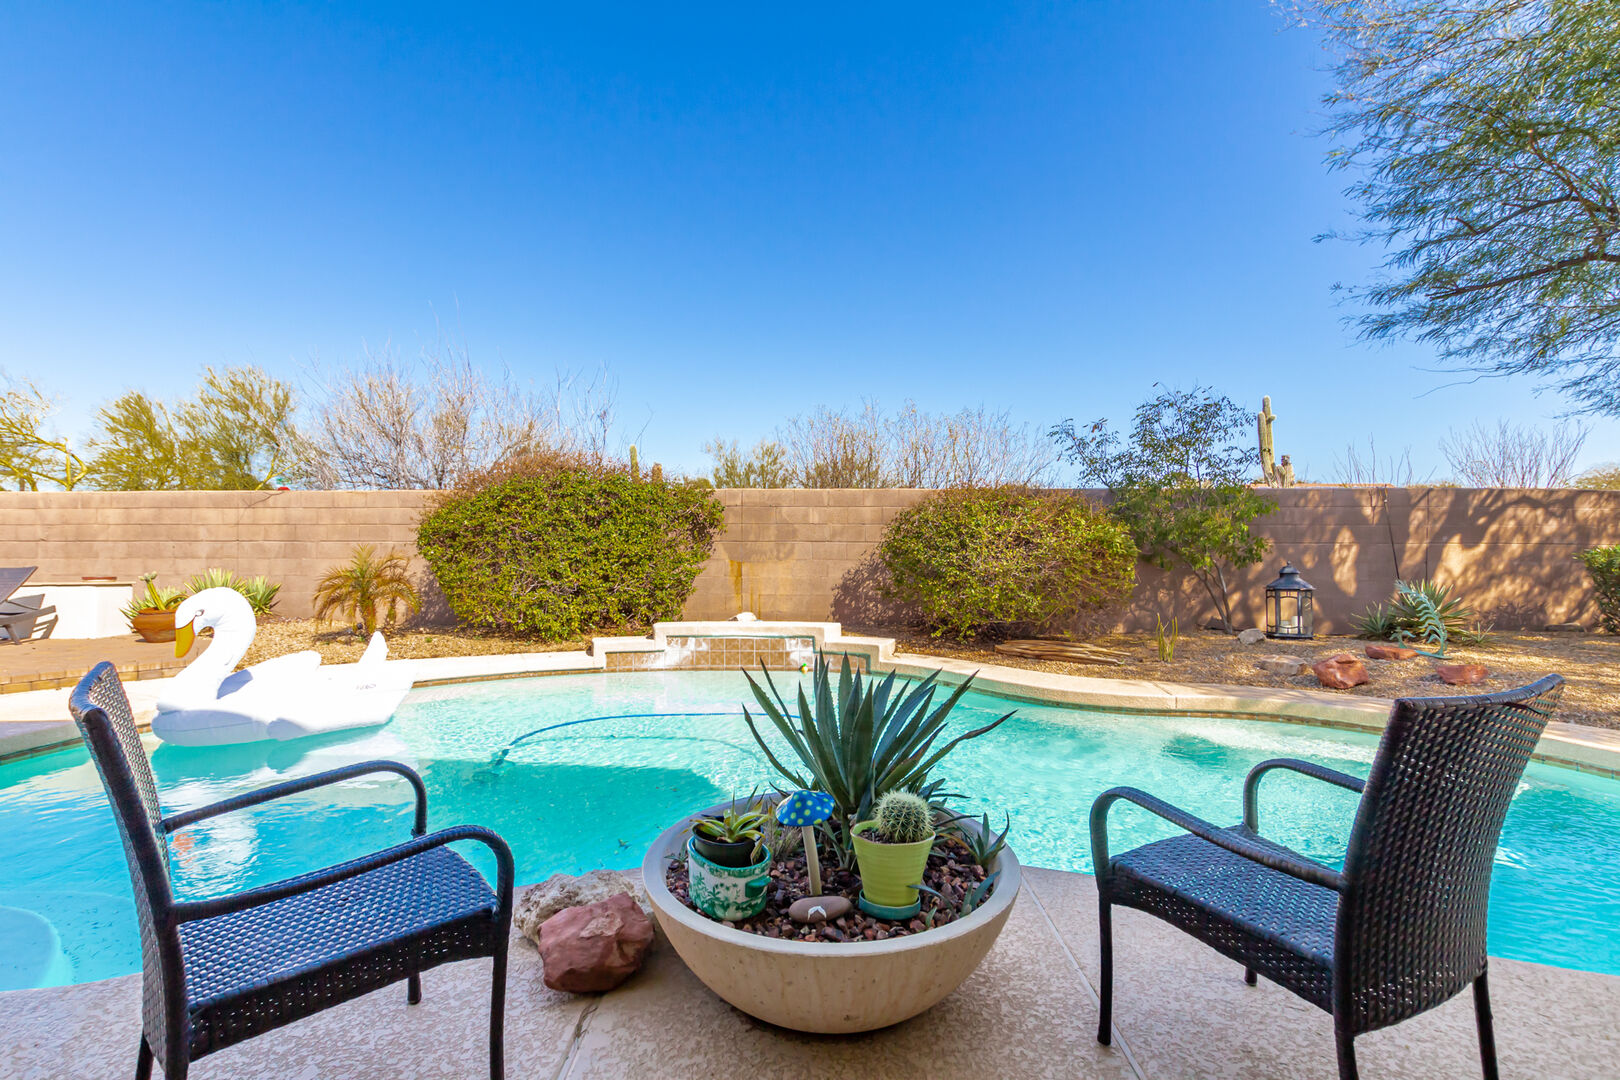 Private Backyard featuring Sparkling Blue Pool, Sun Loungers, Fire Pit, BBQ Grill, and Covered Patio with Space Heater and Lounging Areas.